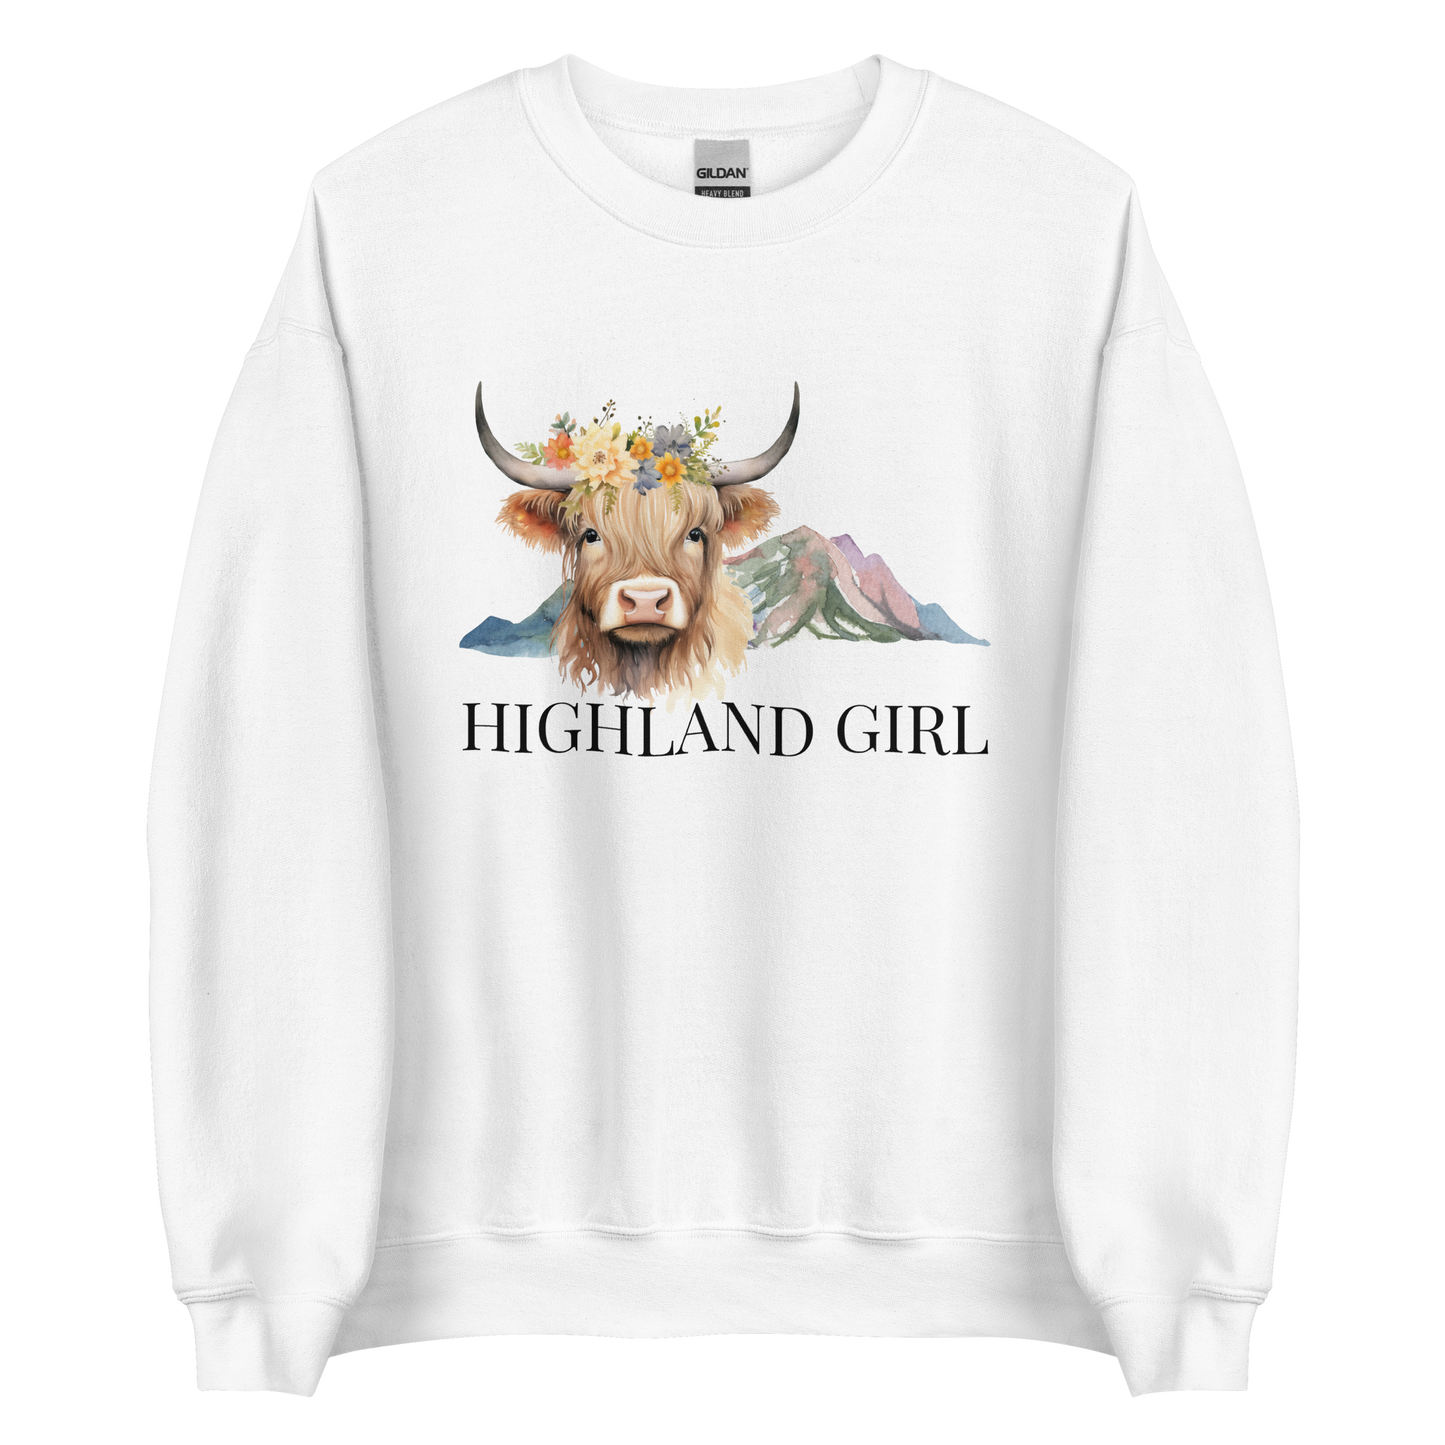 White Highland Cow Sweatshirt featuring an adorable Highland Girl graphic on the chest - Cute Graphic Highland Cow Sweatshirts - Boozy Fox